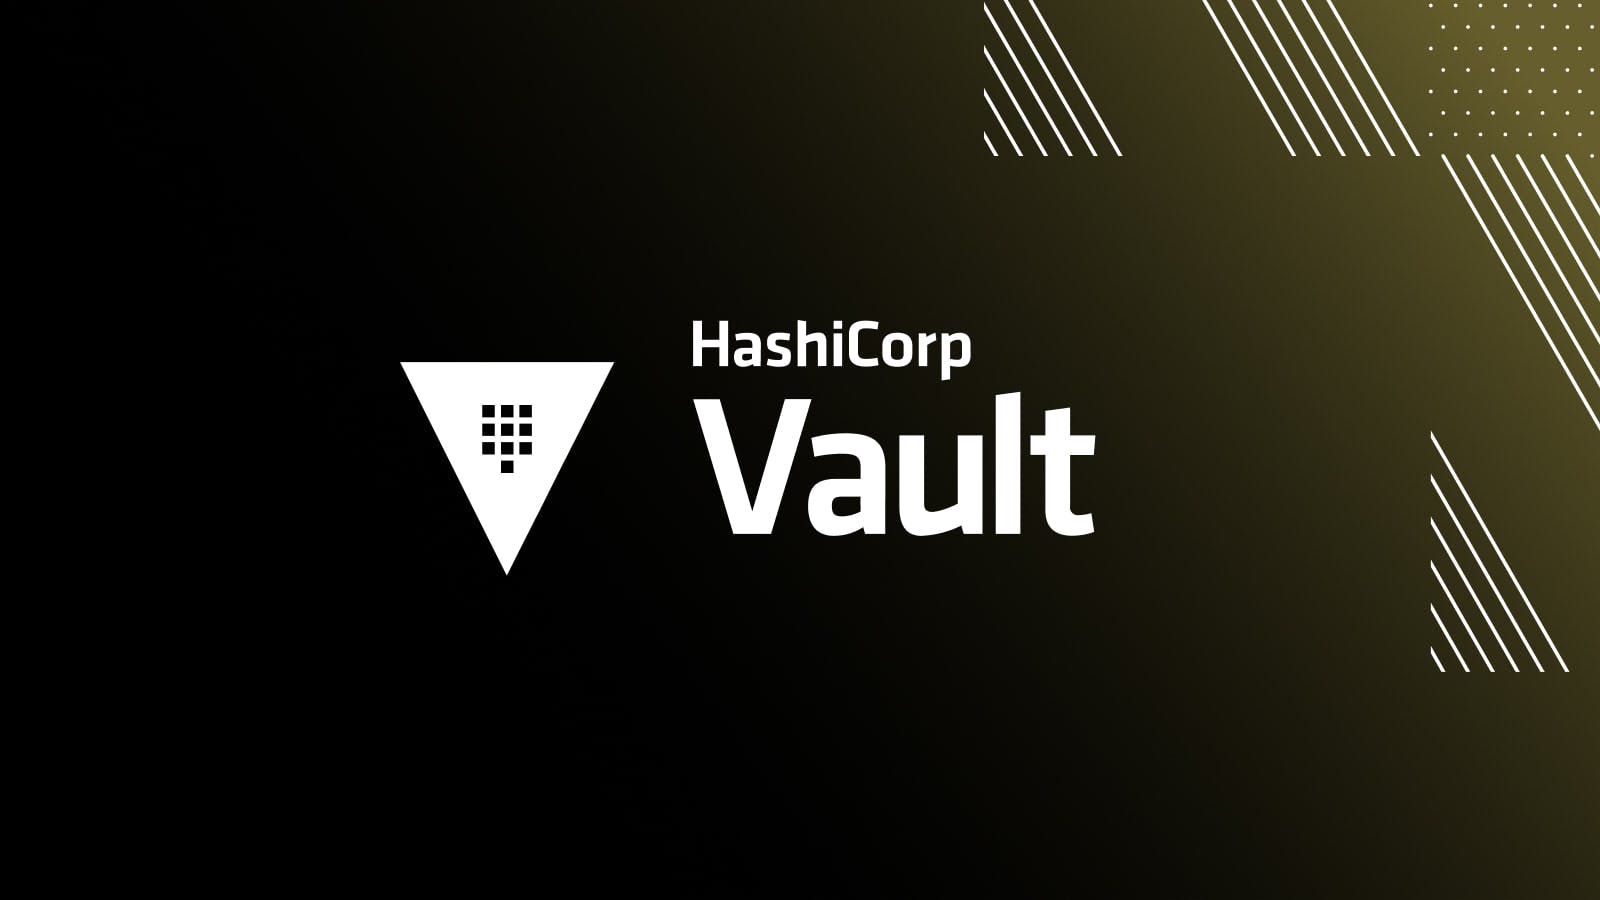 Vault 1.16 brings enhanced resilience, visibility, and more